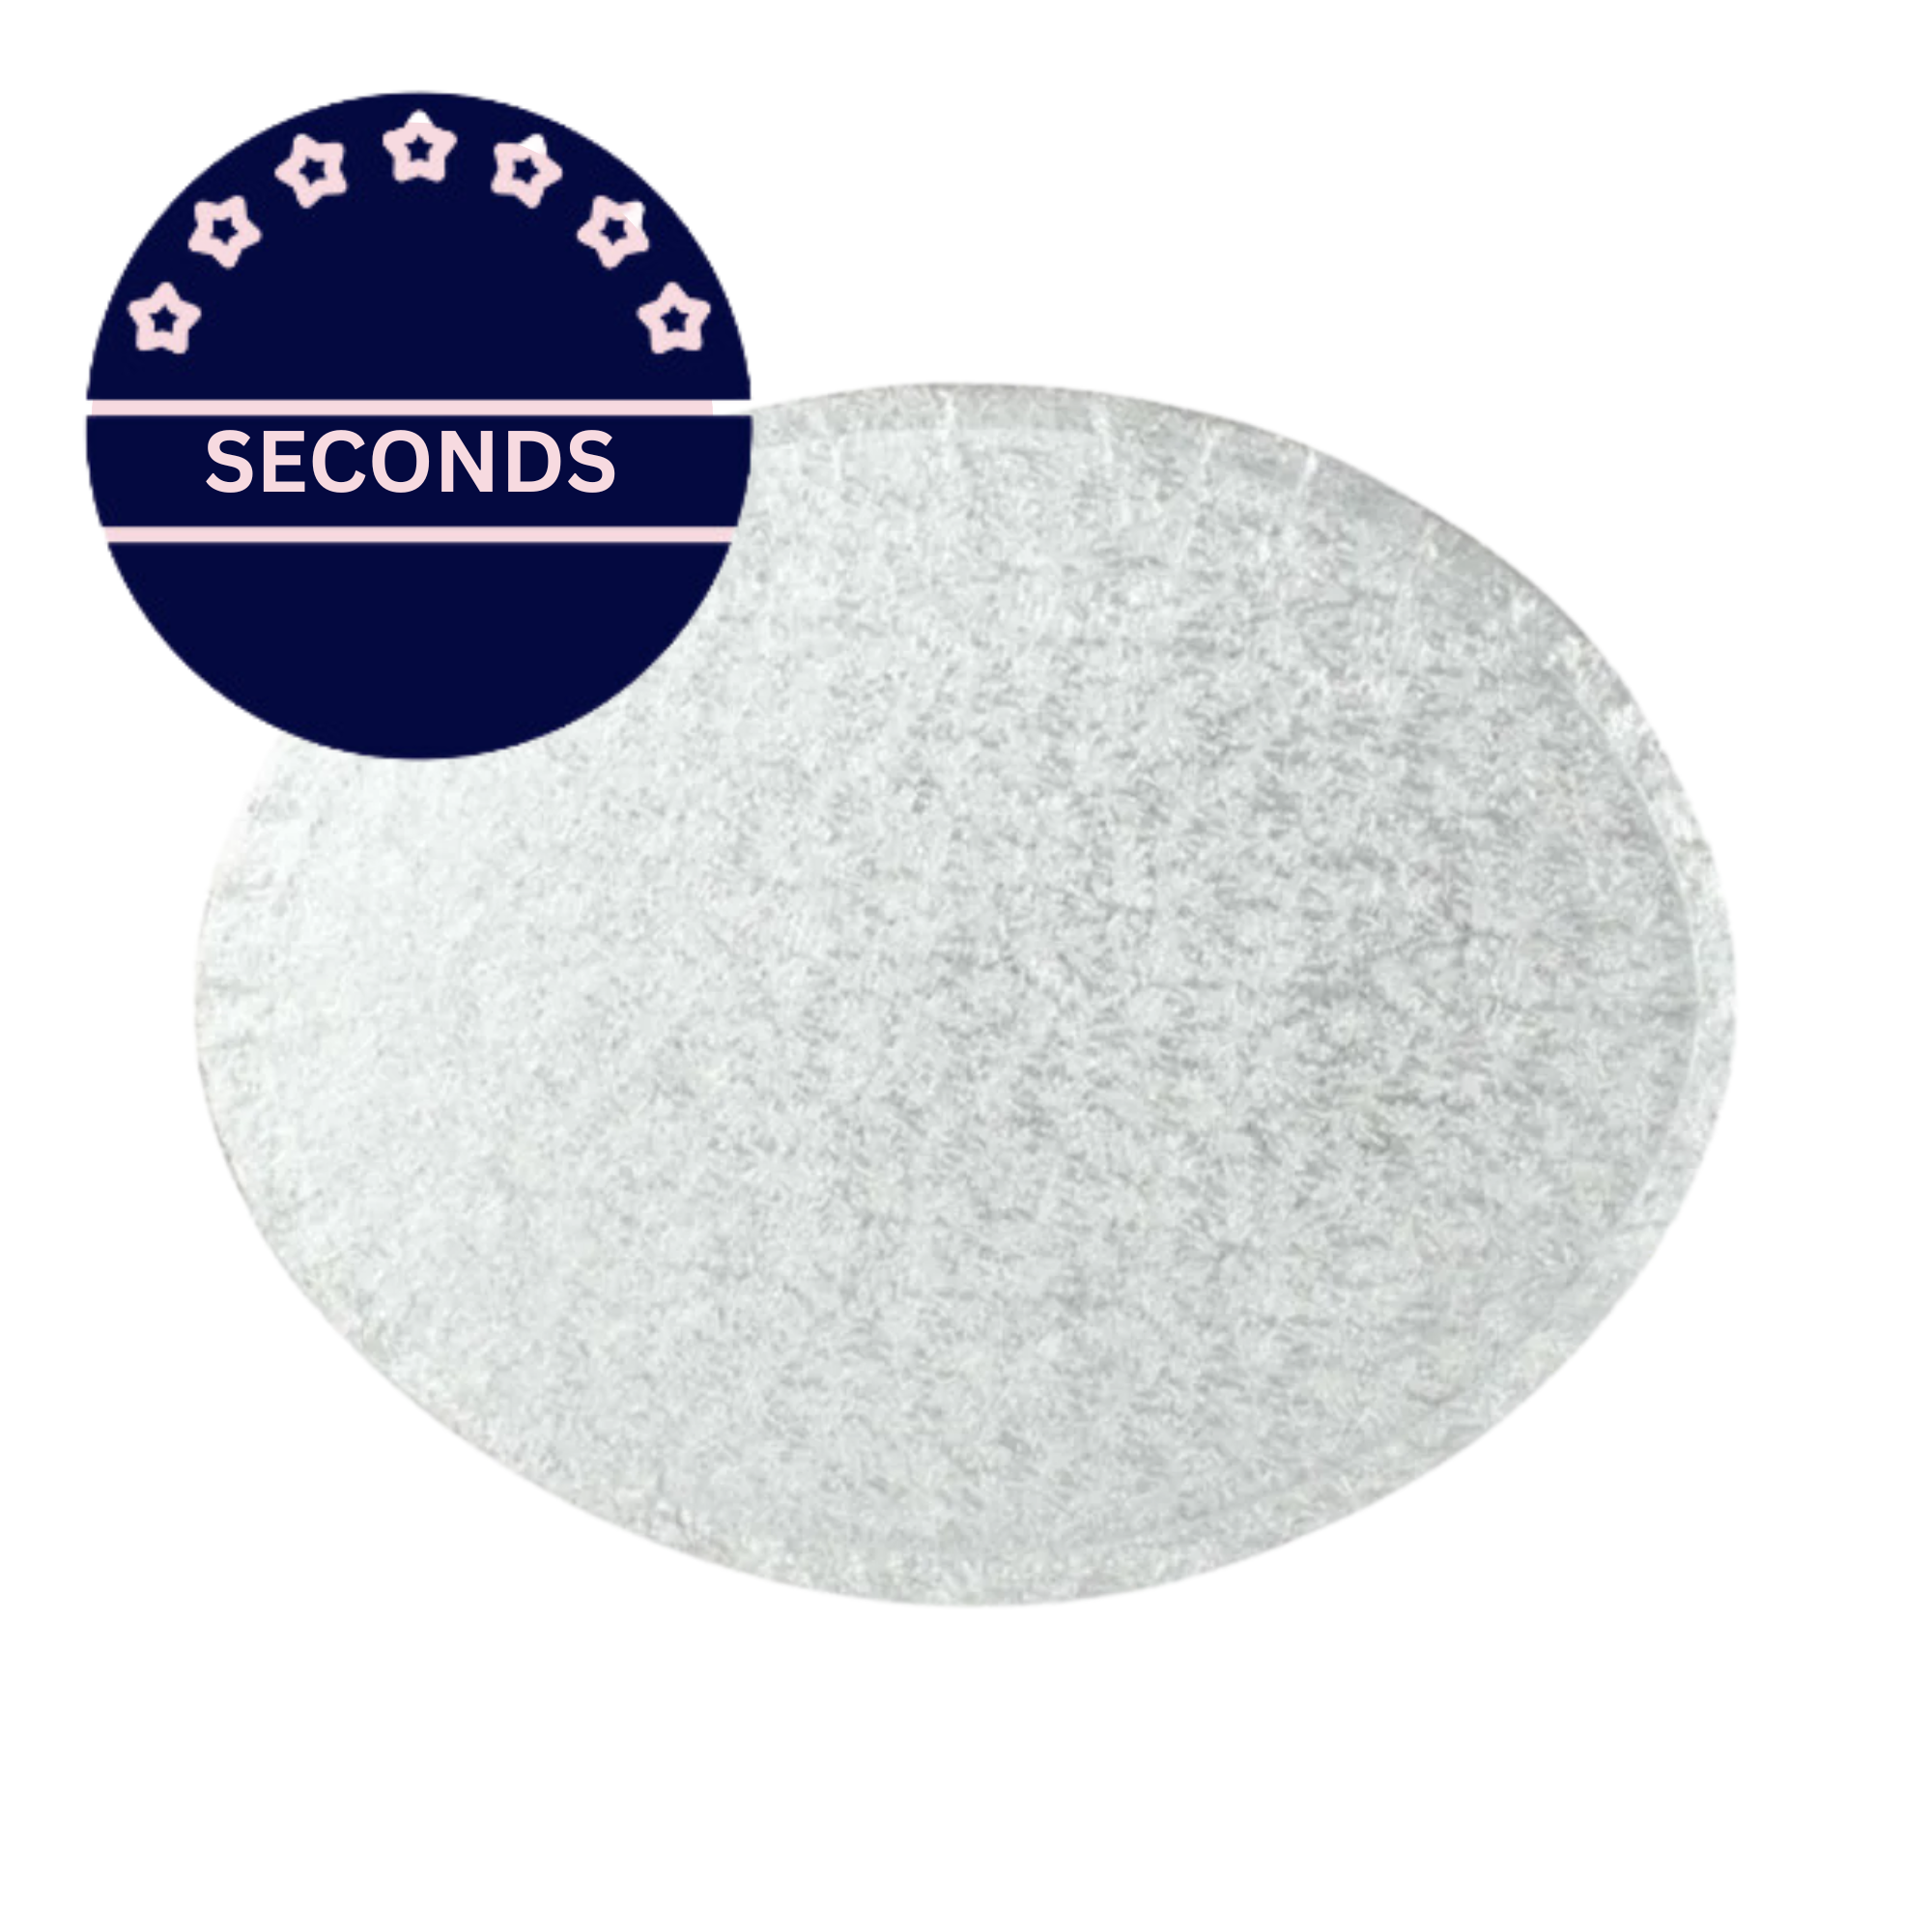 SECONDS - Oval Cake Drum 12mm Thick Cake Board - Silver - 13" x 11"